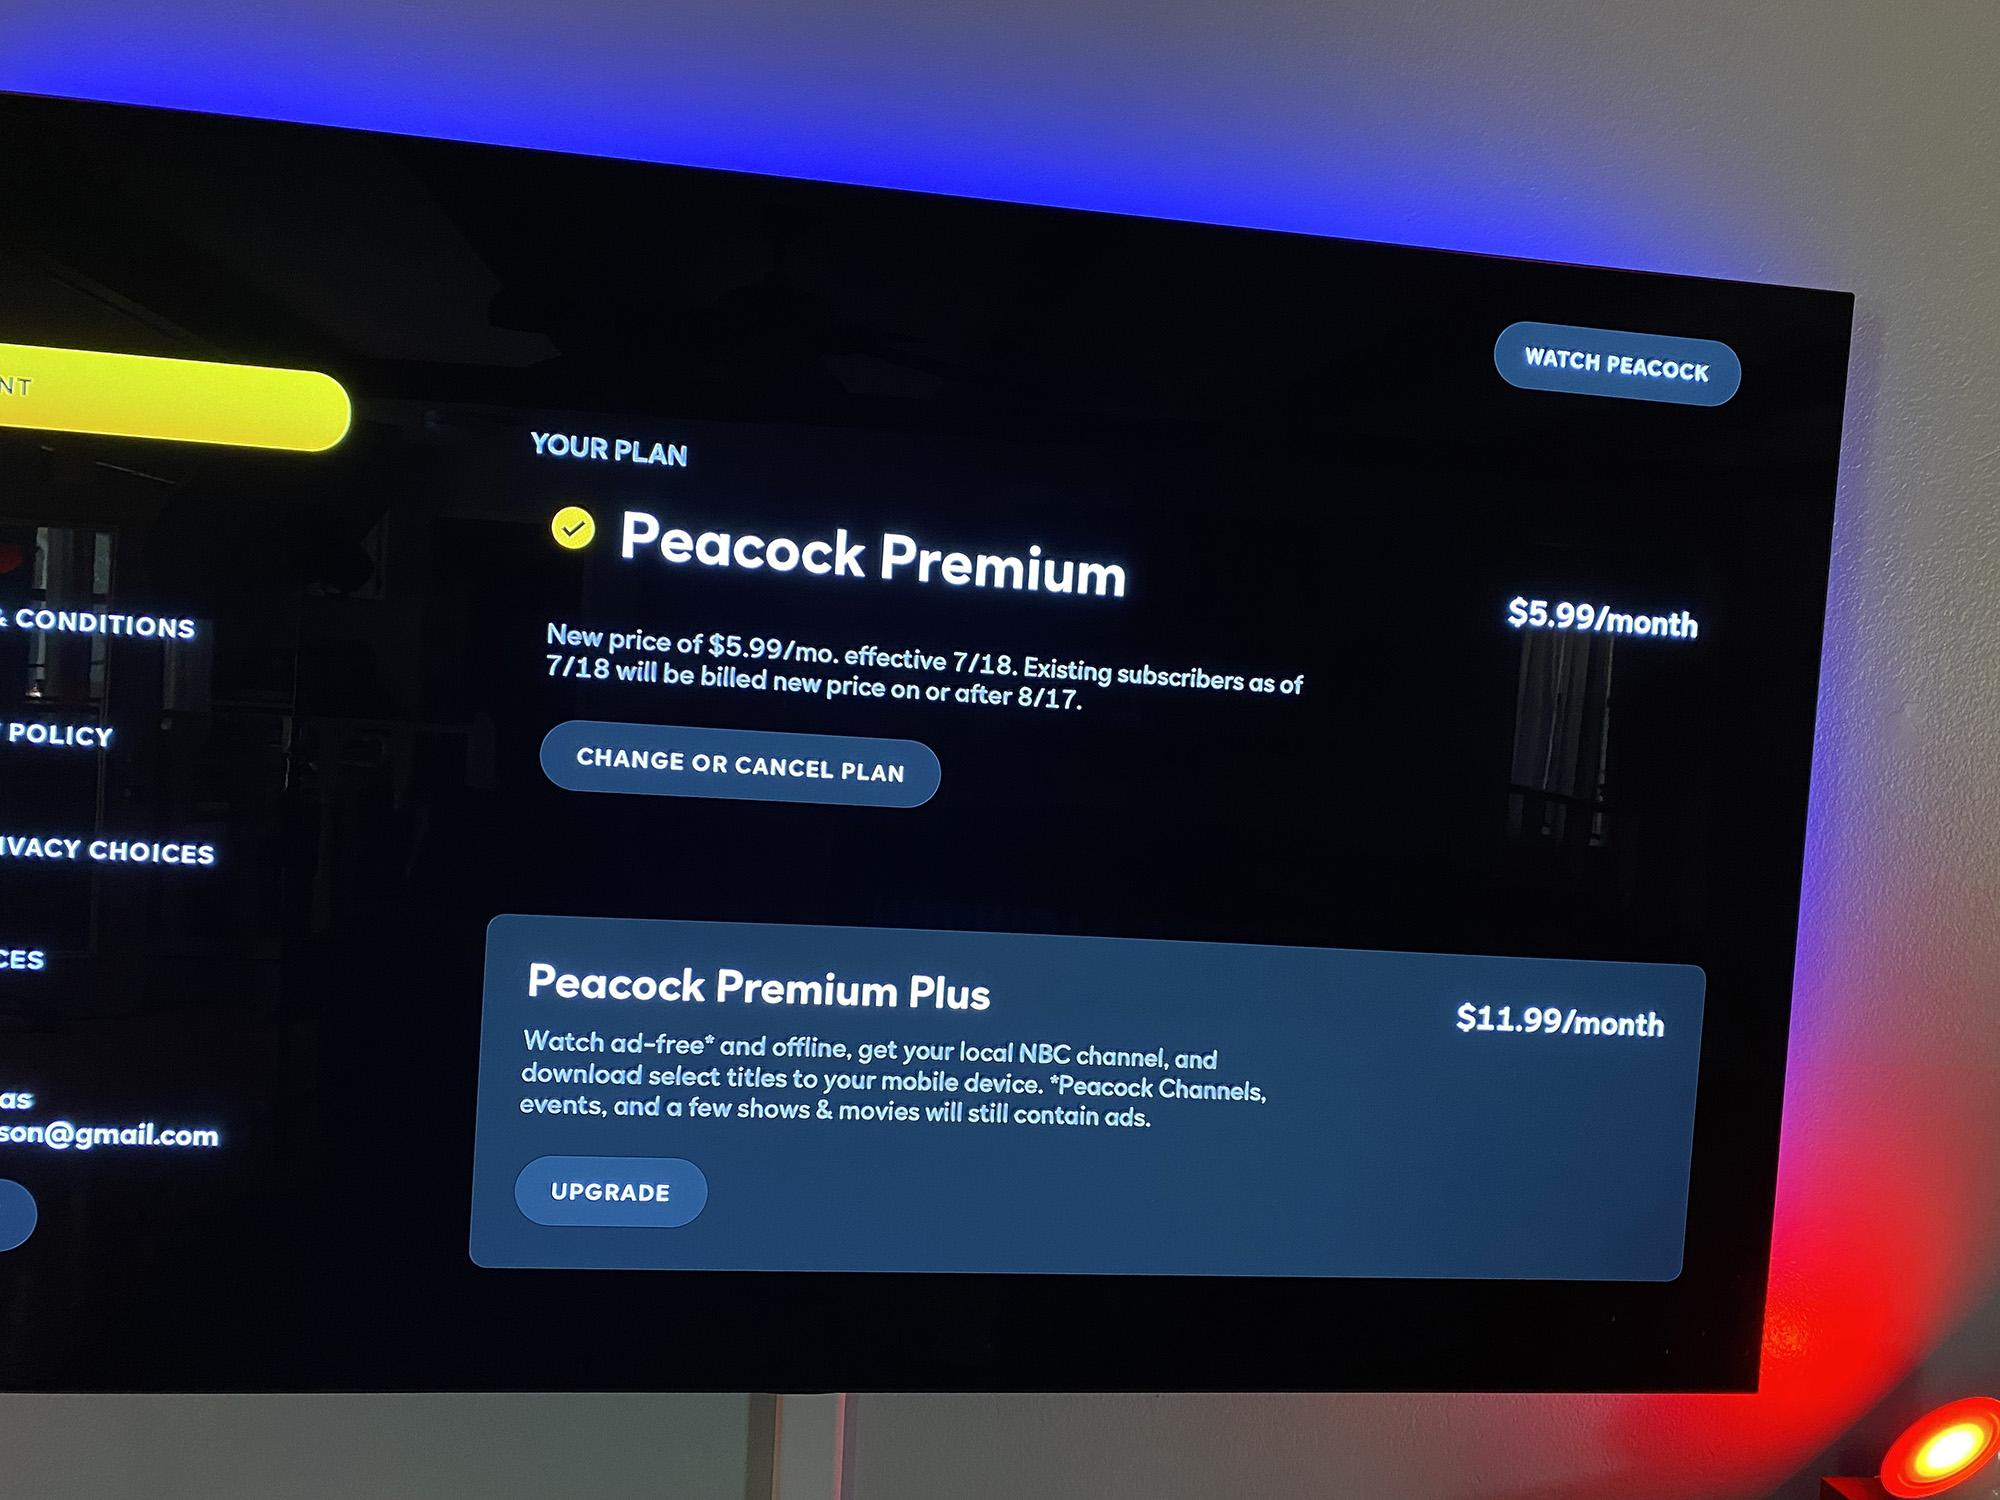 Peacock price increase information on an Apple TV.